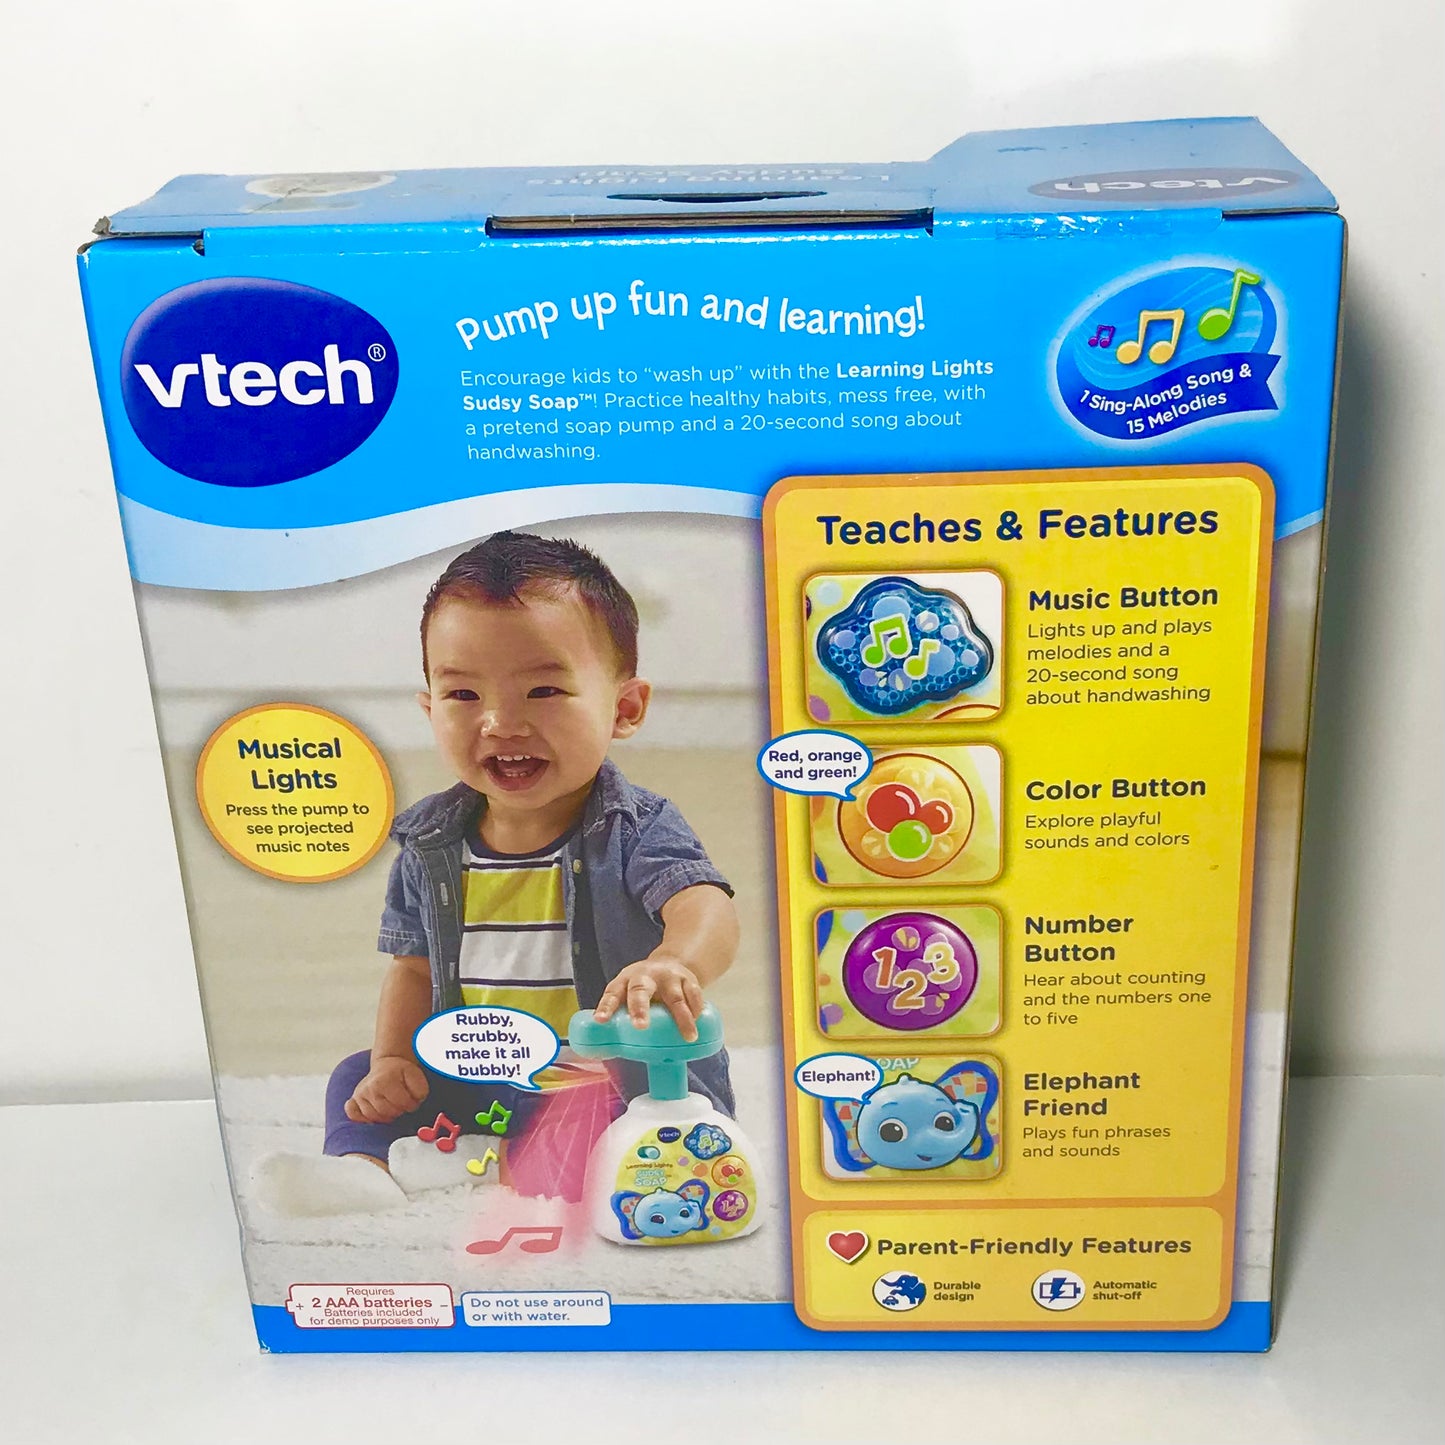 VTech Learning Lights Sudsy Soap - English Edition Practice Healthy Habits NEW